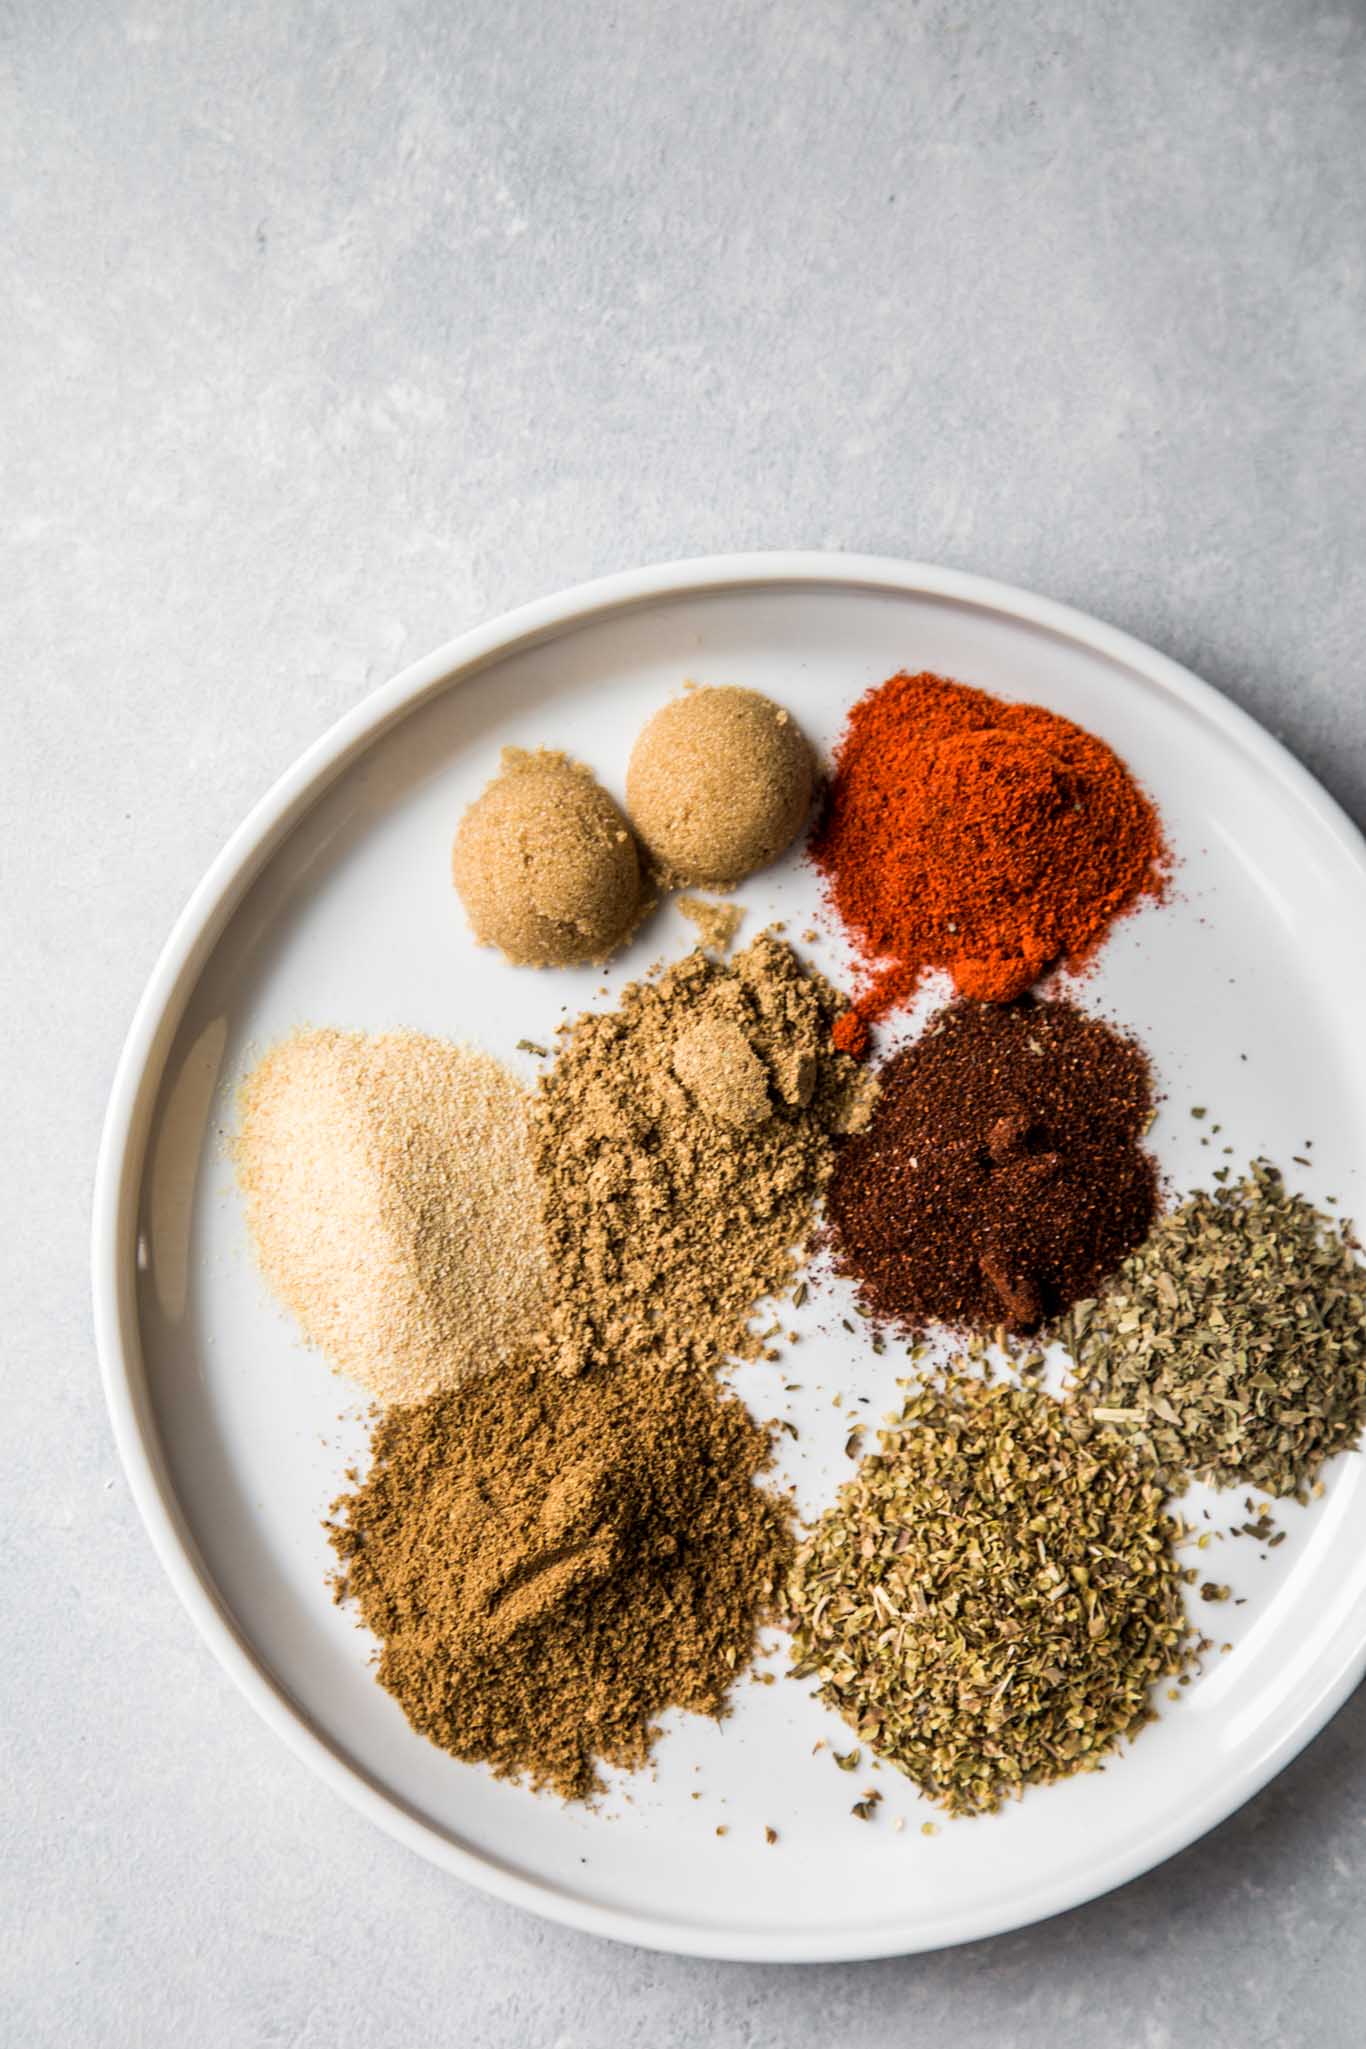 Spices for carnitas tacos